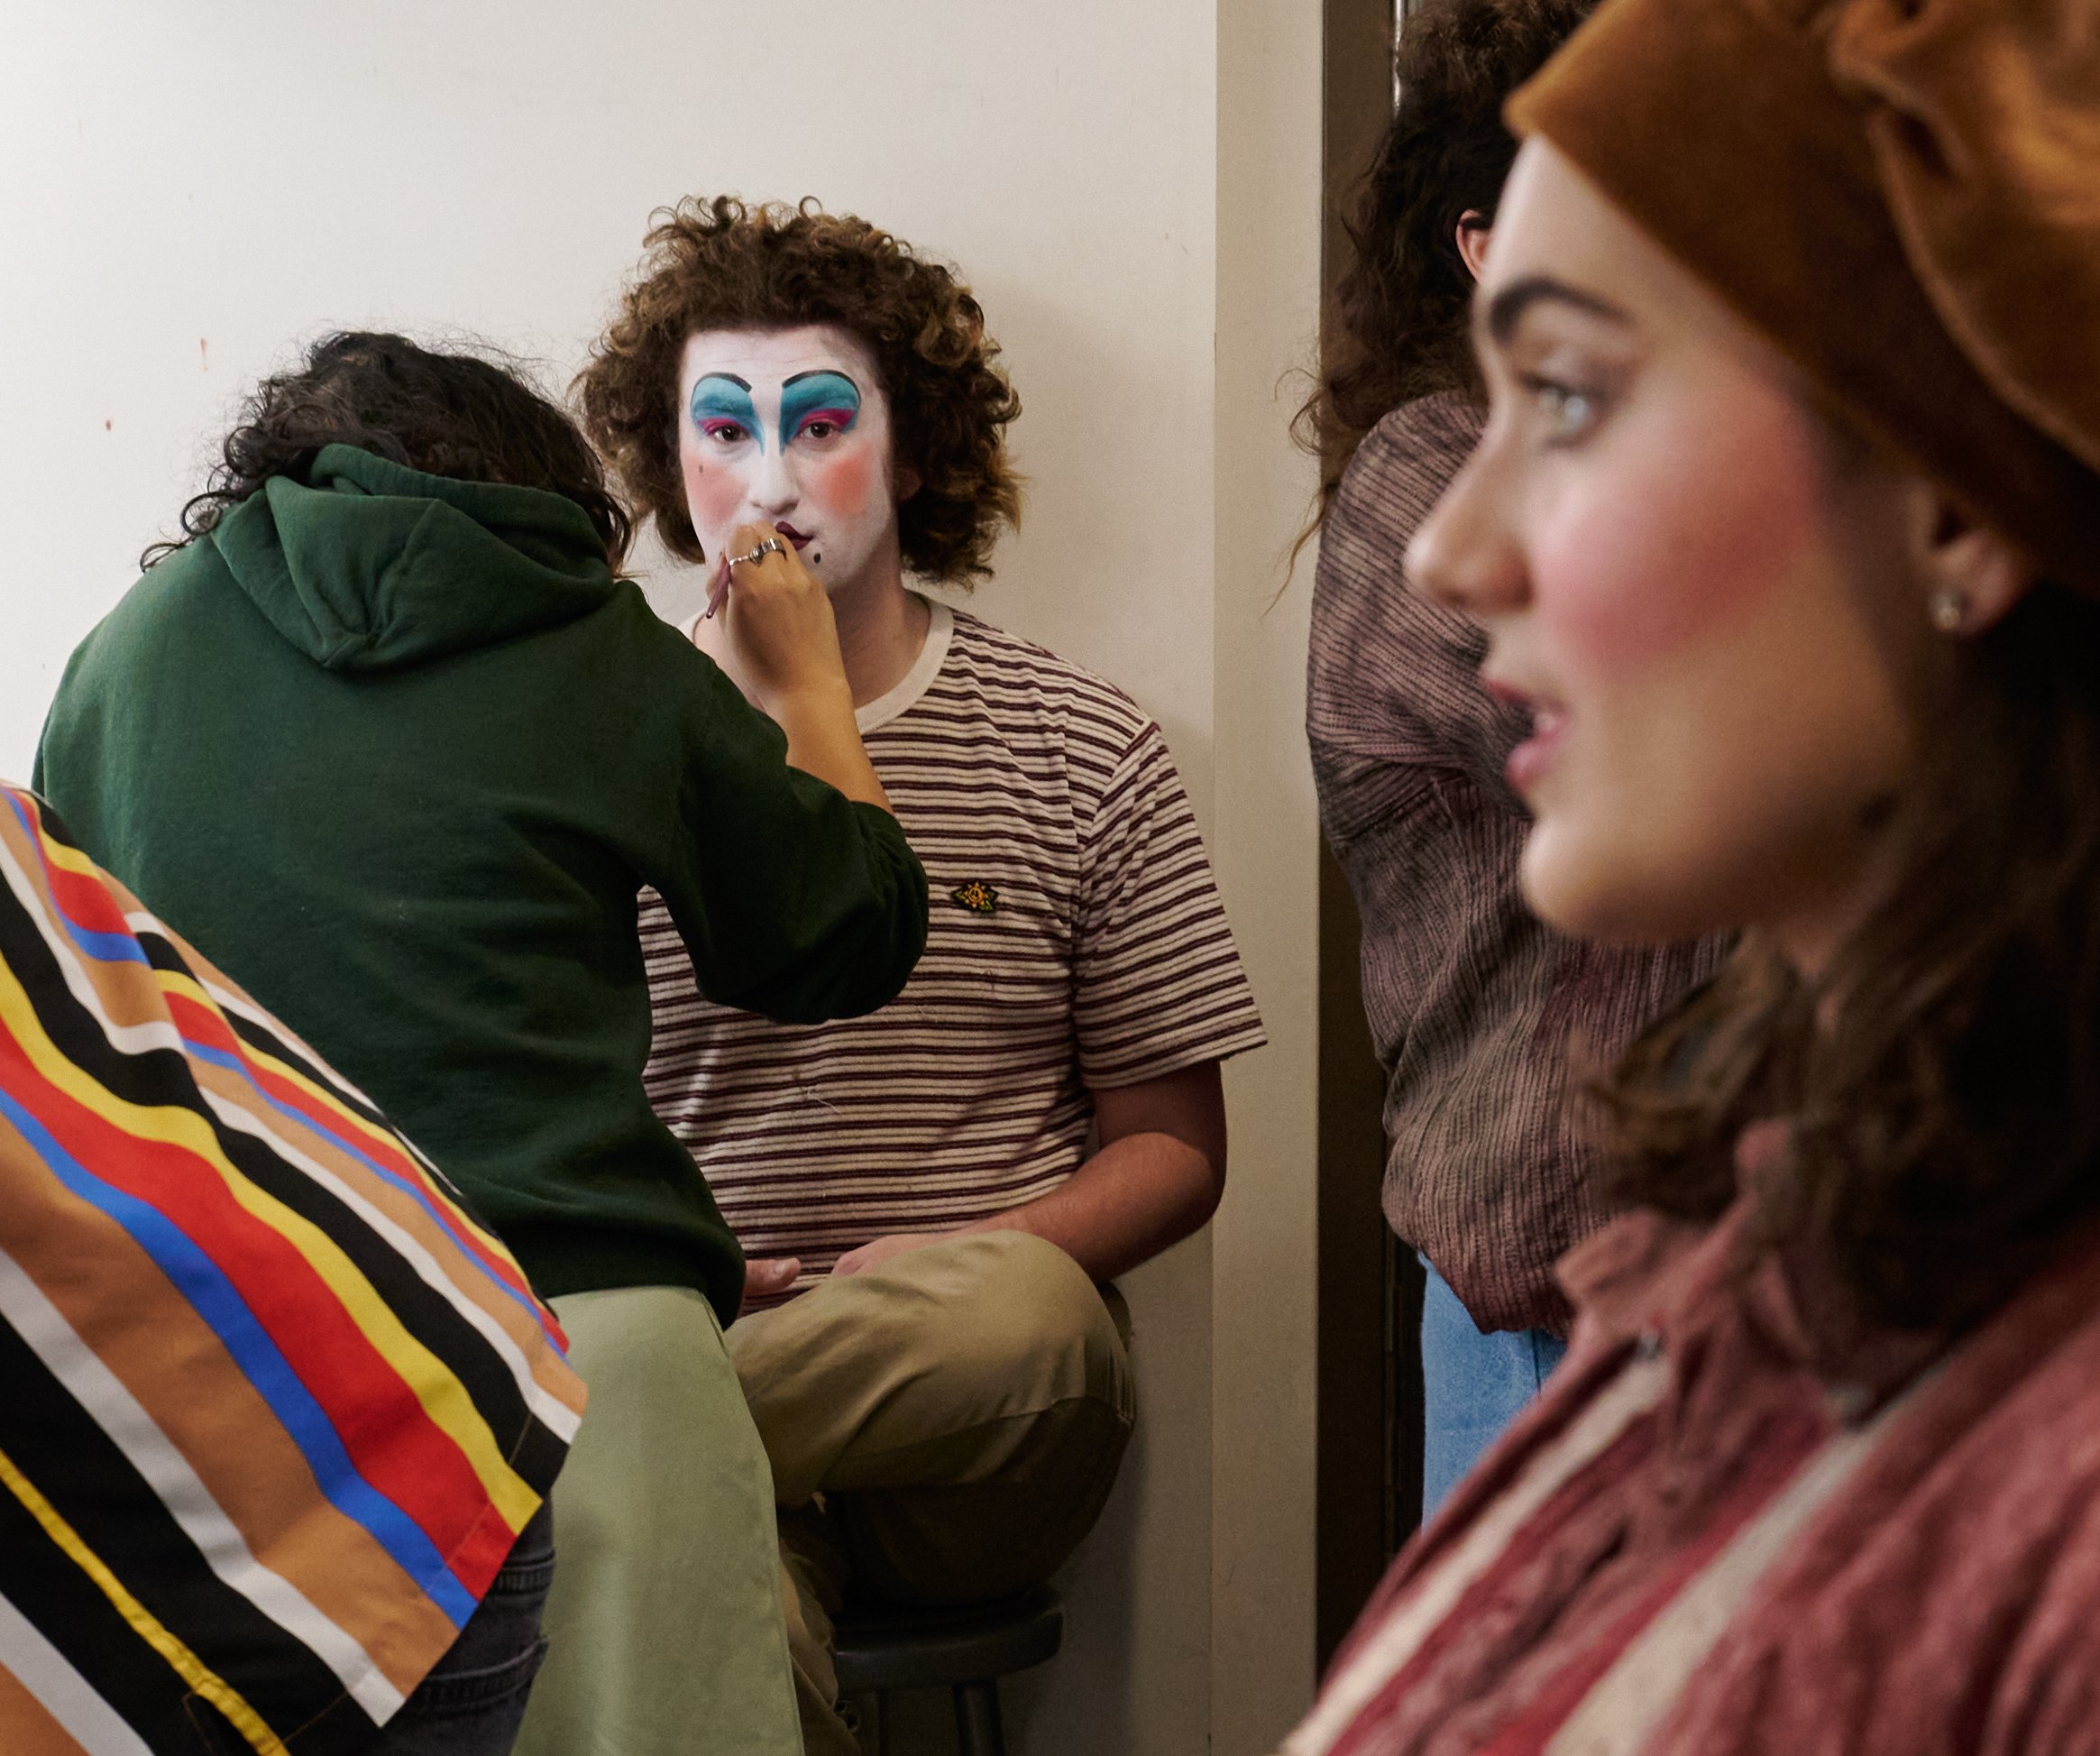  Desh Johnson (left), Jordi Kligman (center), and Justine Marin (right) prepare in the dressing room backstage before a performance of the Santa Monica College Theatre Arts production of "Treasure Island" at the SMC Main Stage on Sunday, May 22, 2022